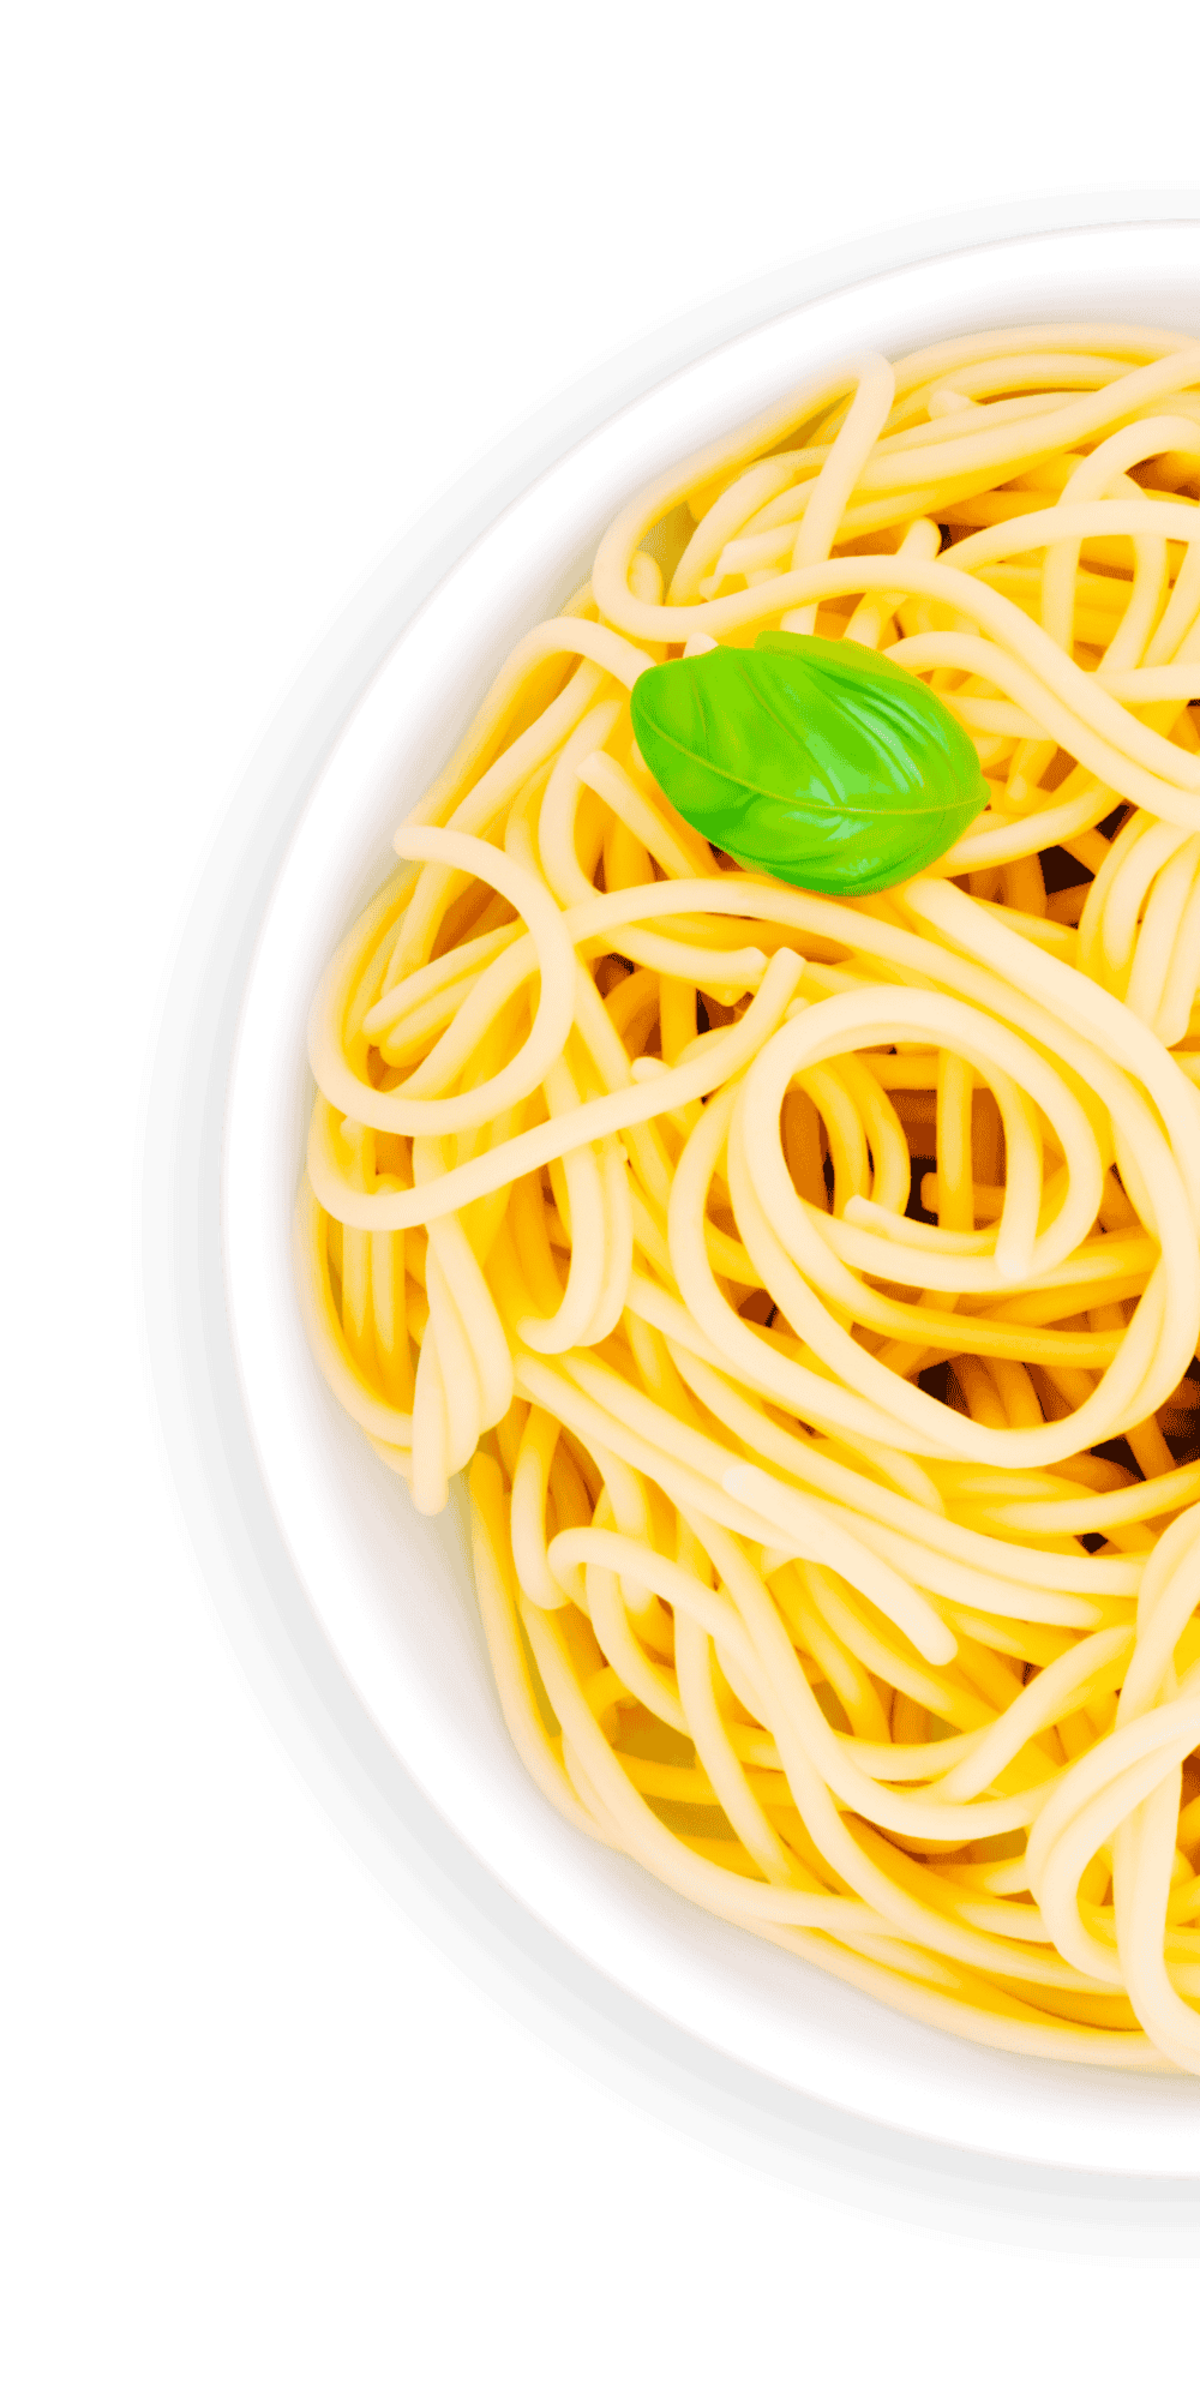 Plate with Spaghetti